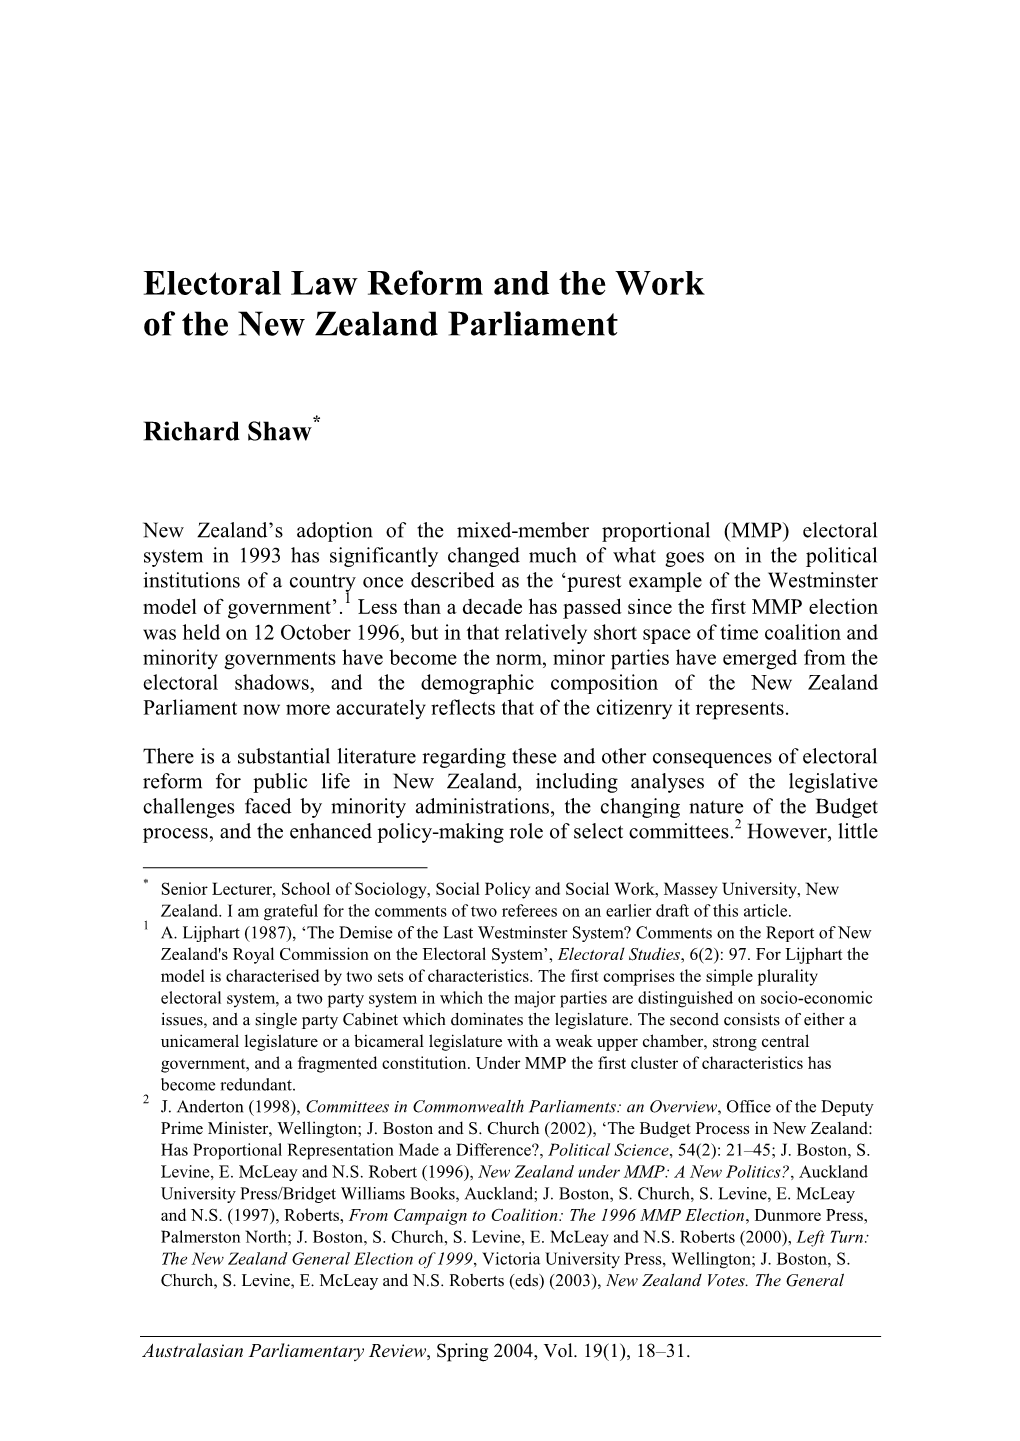 Electoral Law Reform and the Work of the New Zealand Parliament